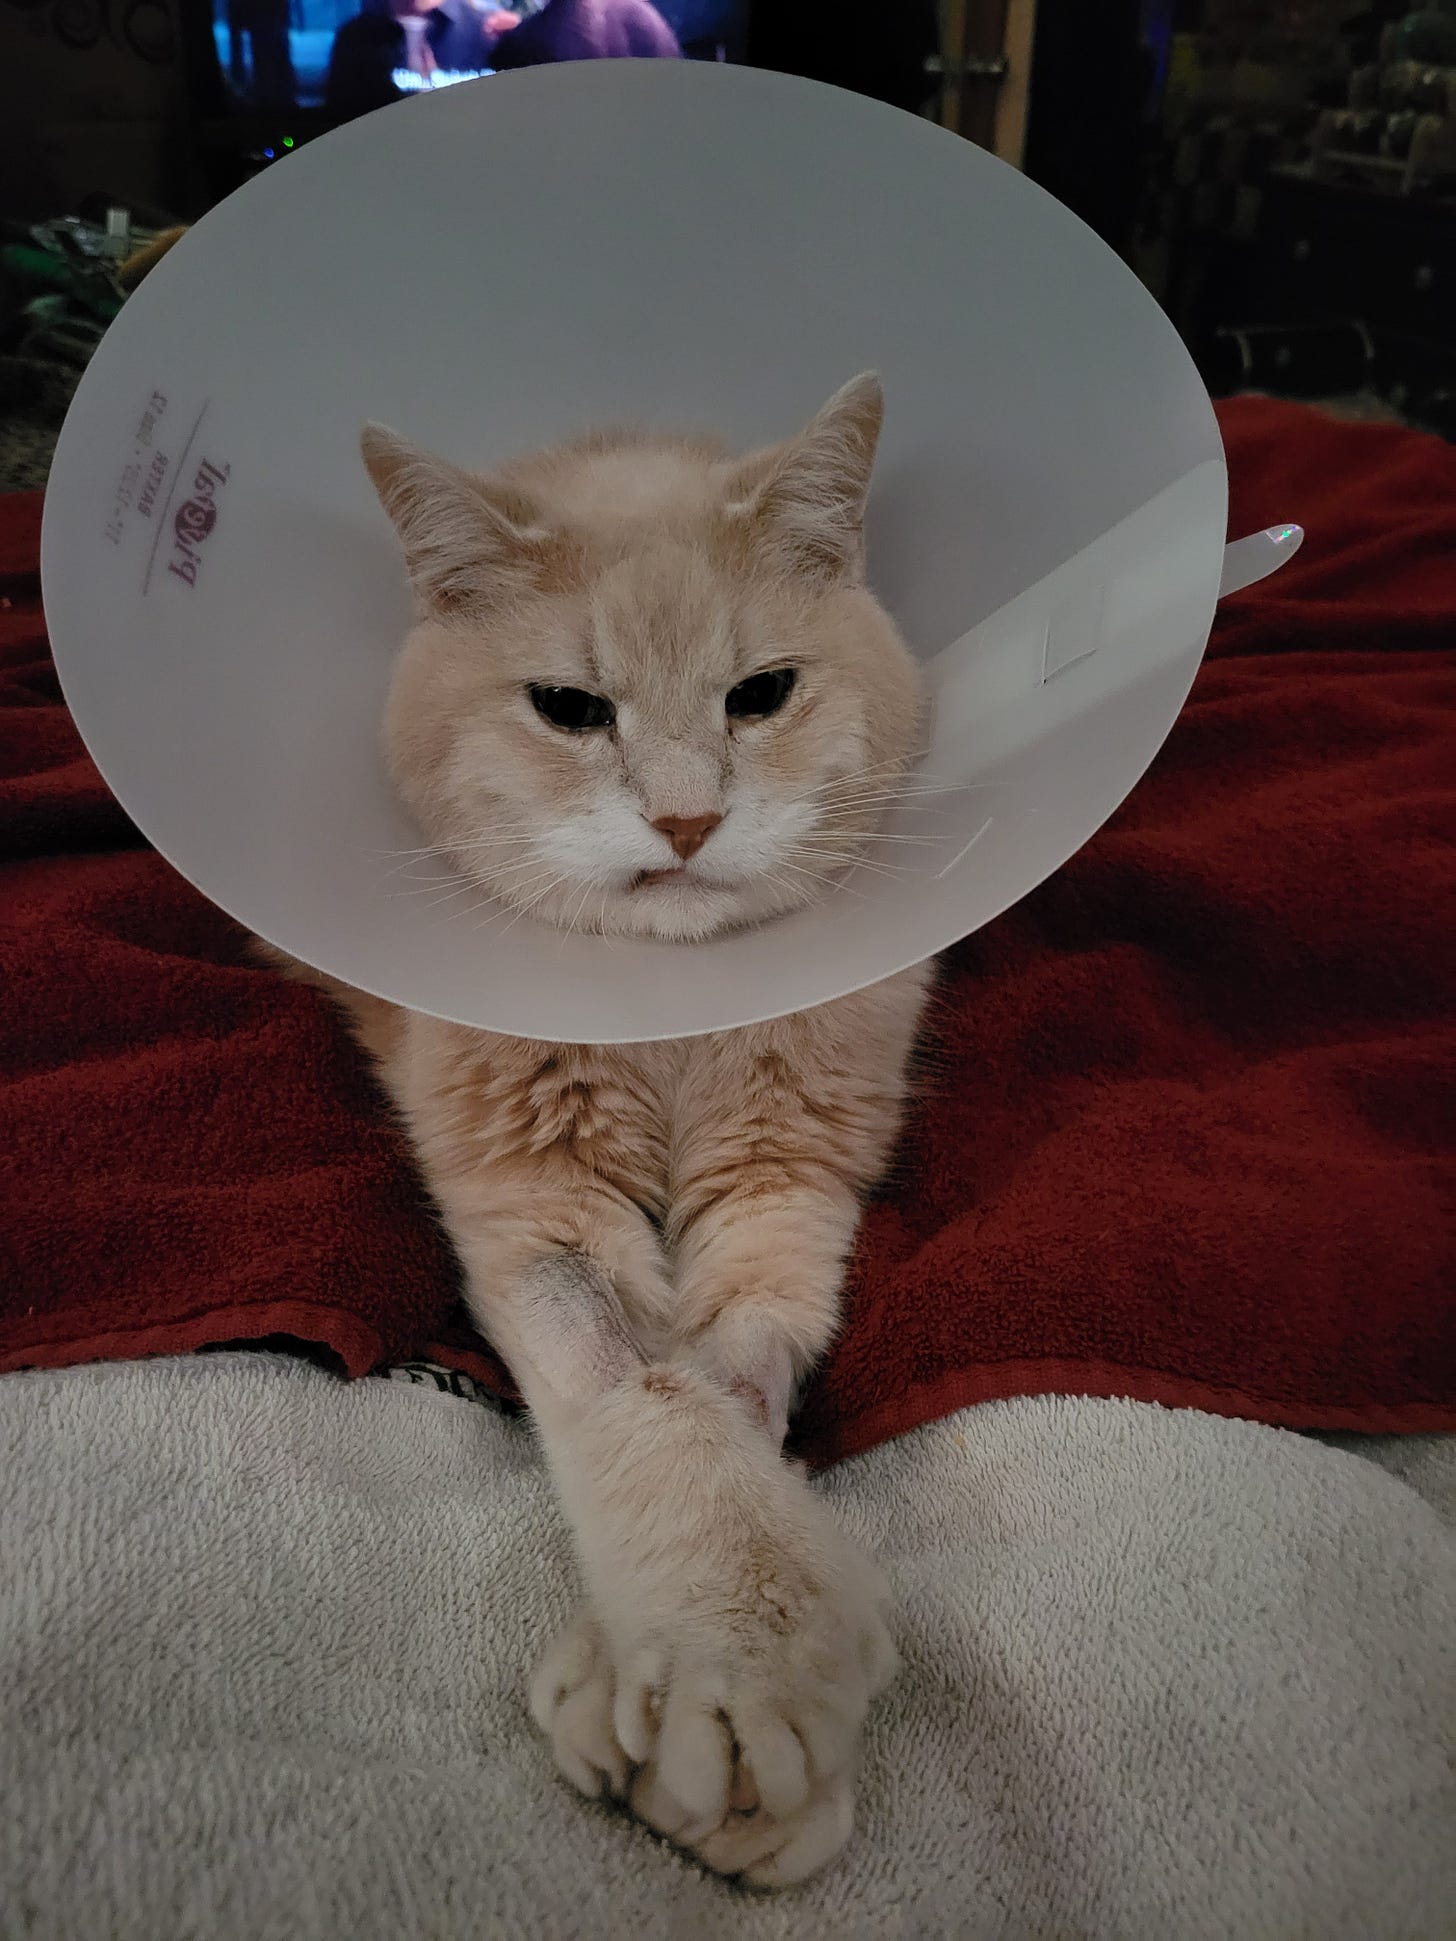 A ginger cat with a snaggle tooth smile wearing a cone is stitting on towels on the bed with his front paws crossed. 